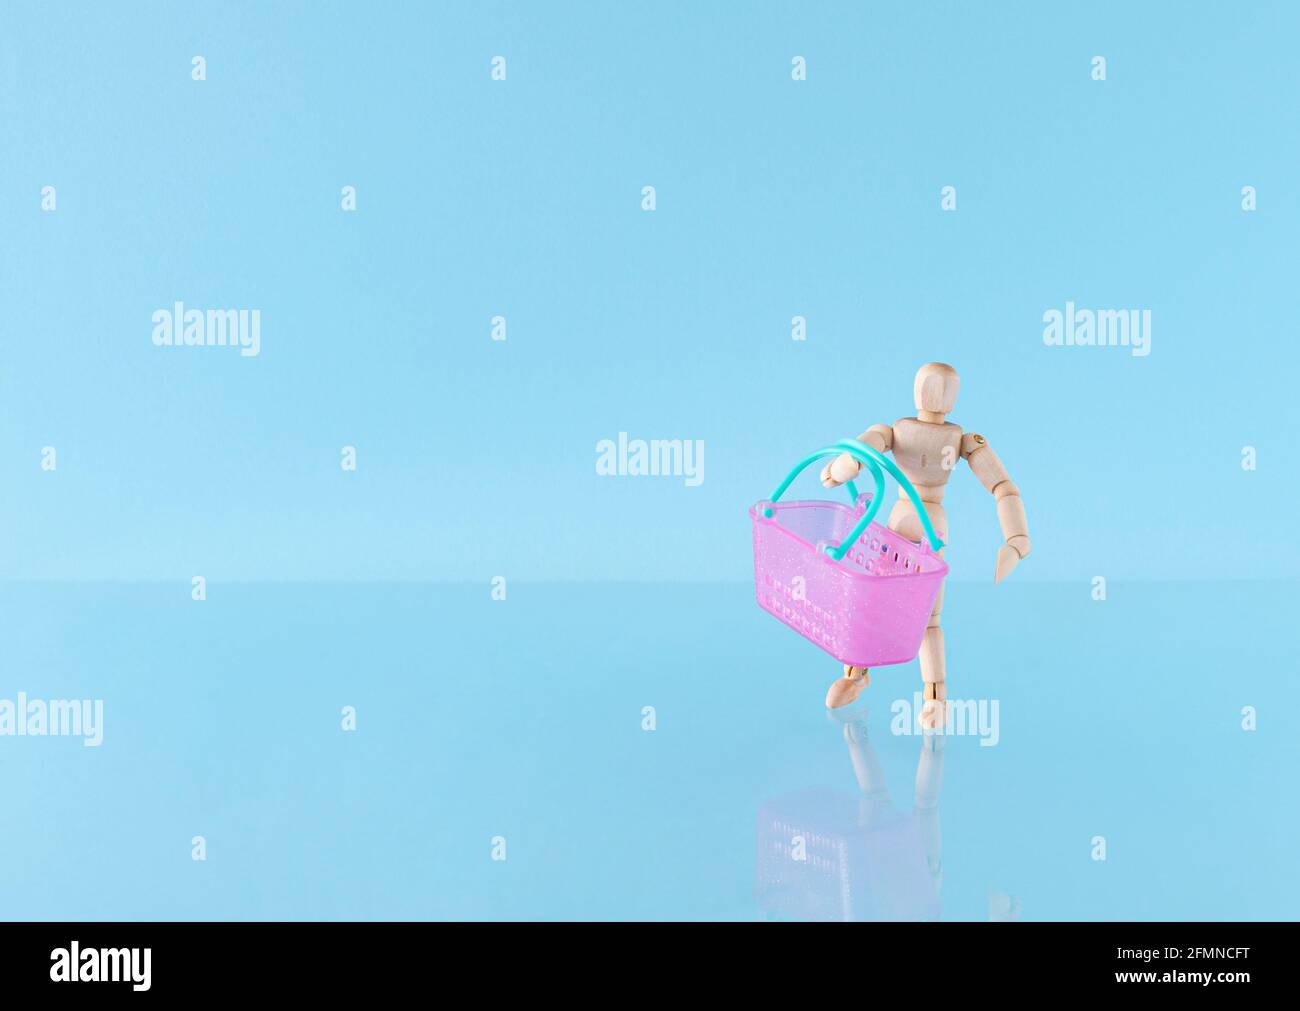 Creative layout with a wooden mannequin with a pink basket on the blue background. Concept of buying and selling of goods or services using the intern Stock Photo